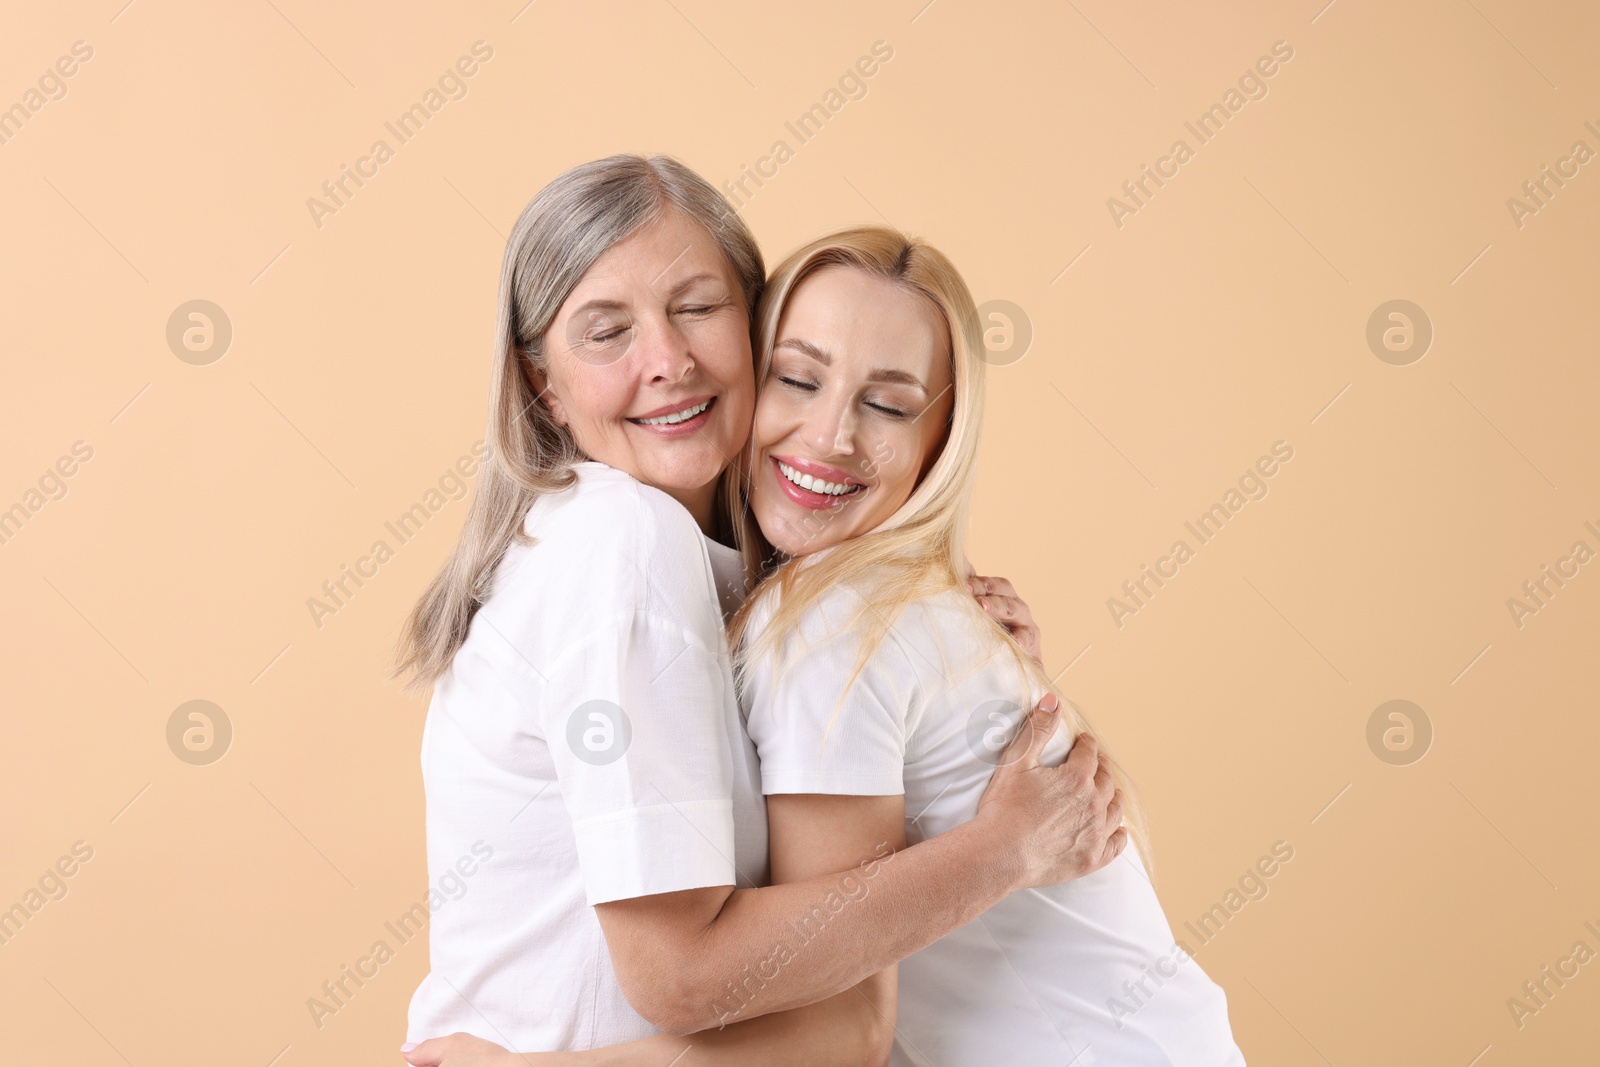 Photo of Family portrait of young woman and her mother on beige background